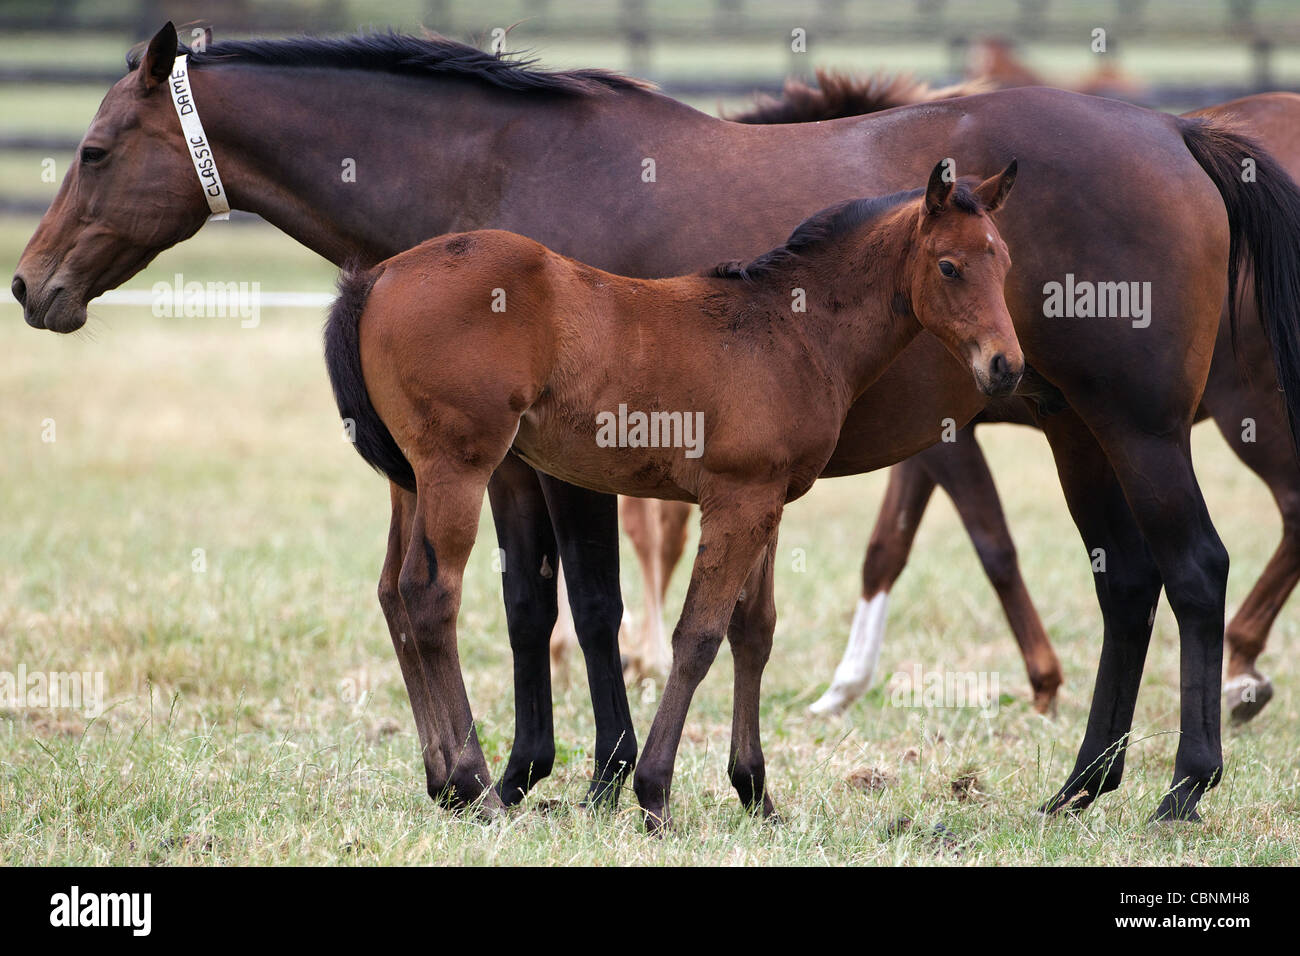 Thoroughbred race horses and foals in paddocks at Cambridge Thoroughbred Lodge, Cambridge, Waikato, New Zealand Stock Photo